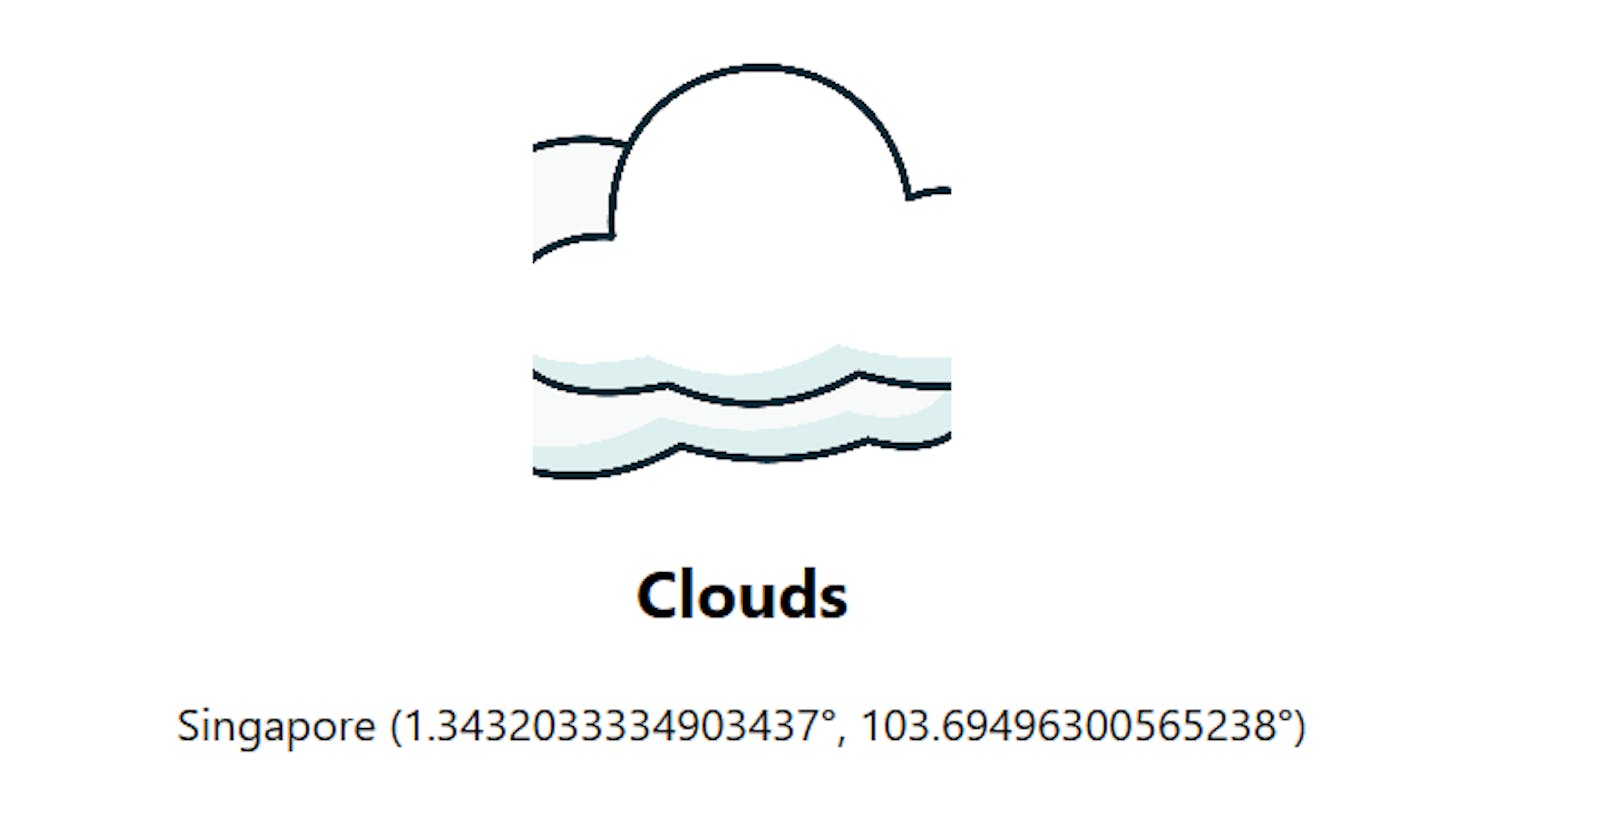 Making a simple Geolocation Weather App using HTML/CSS/JS